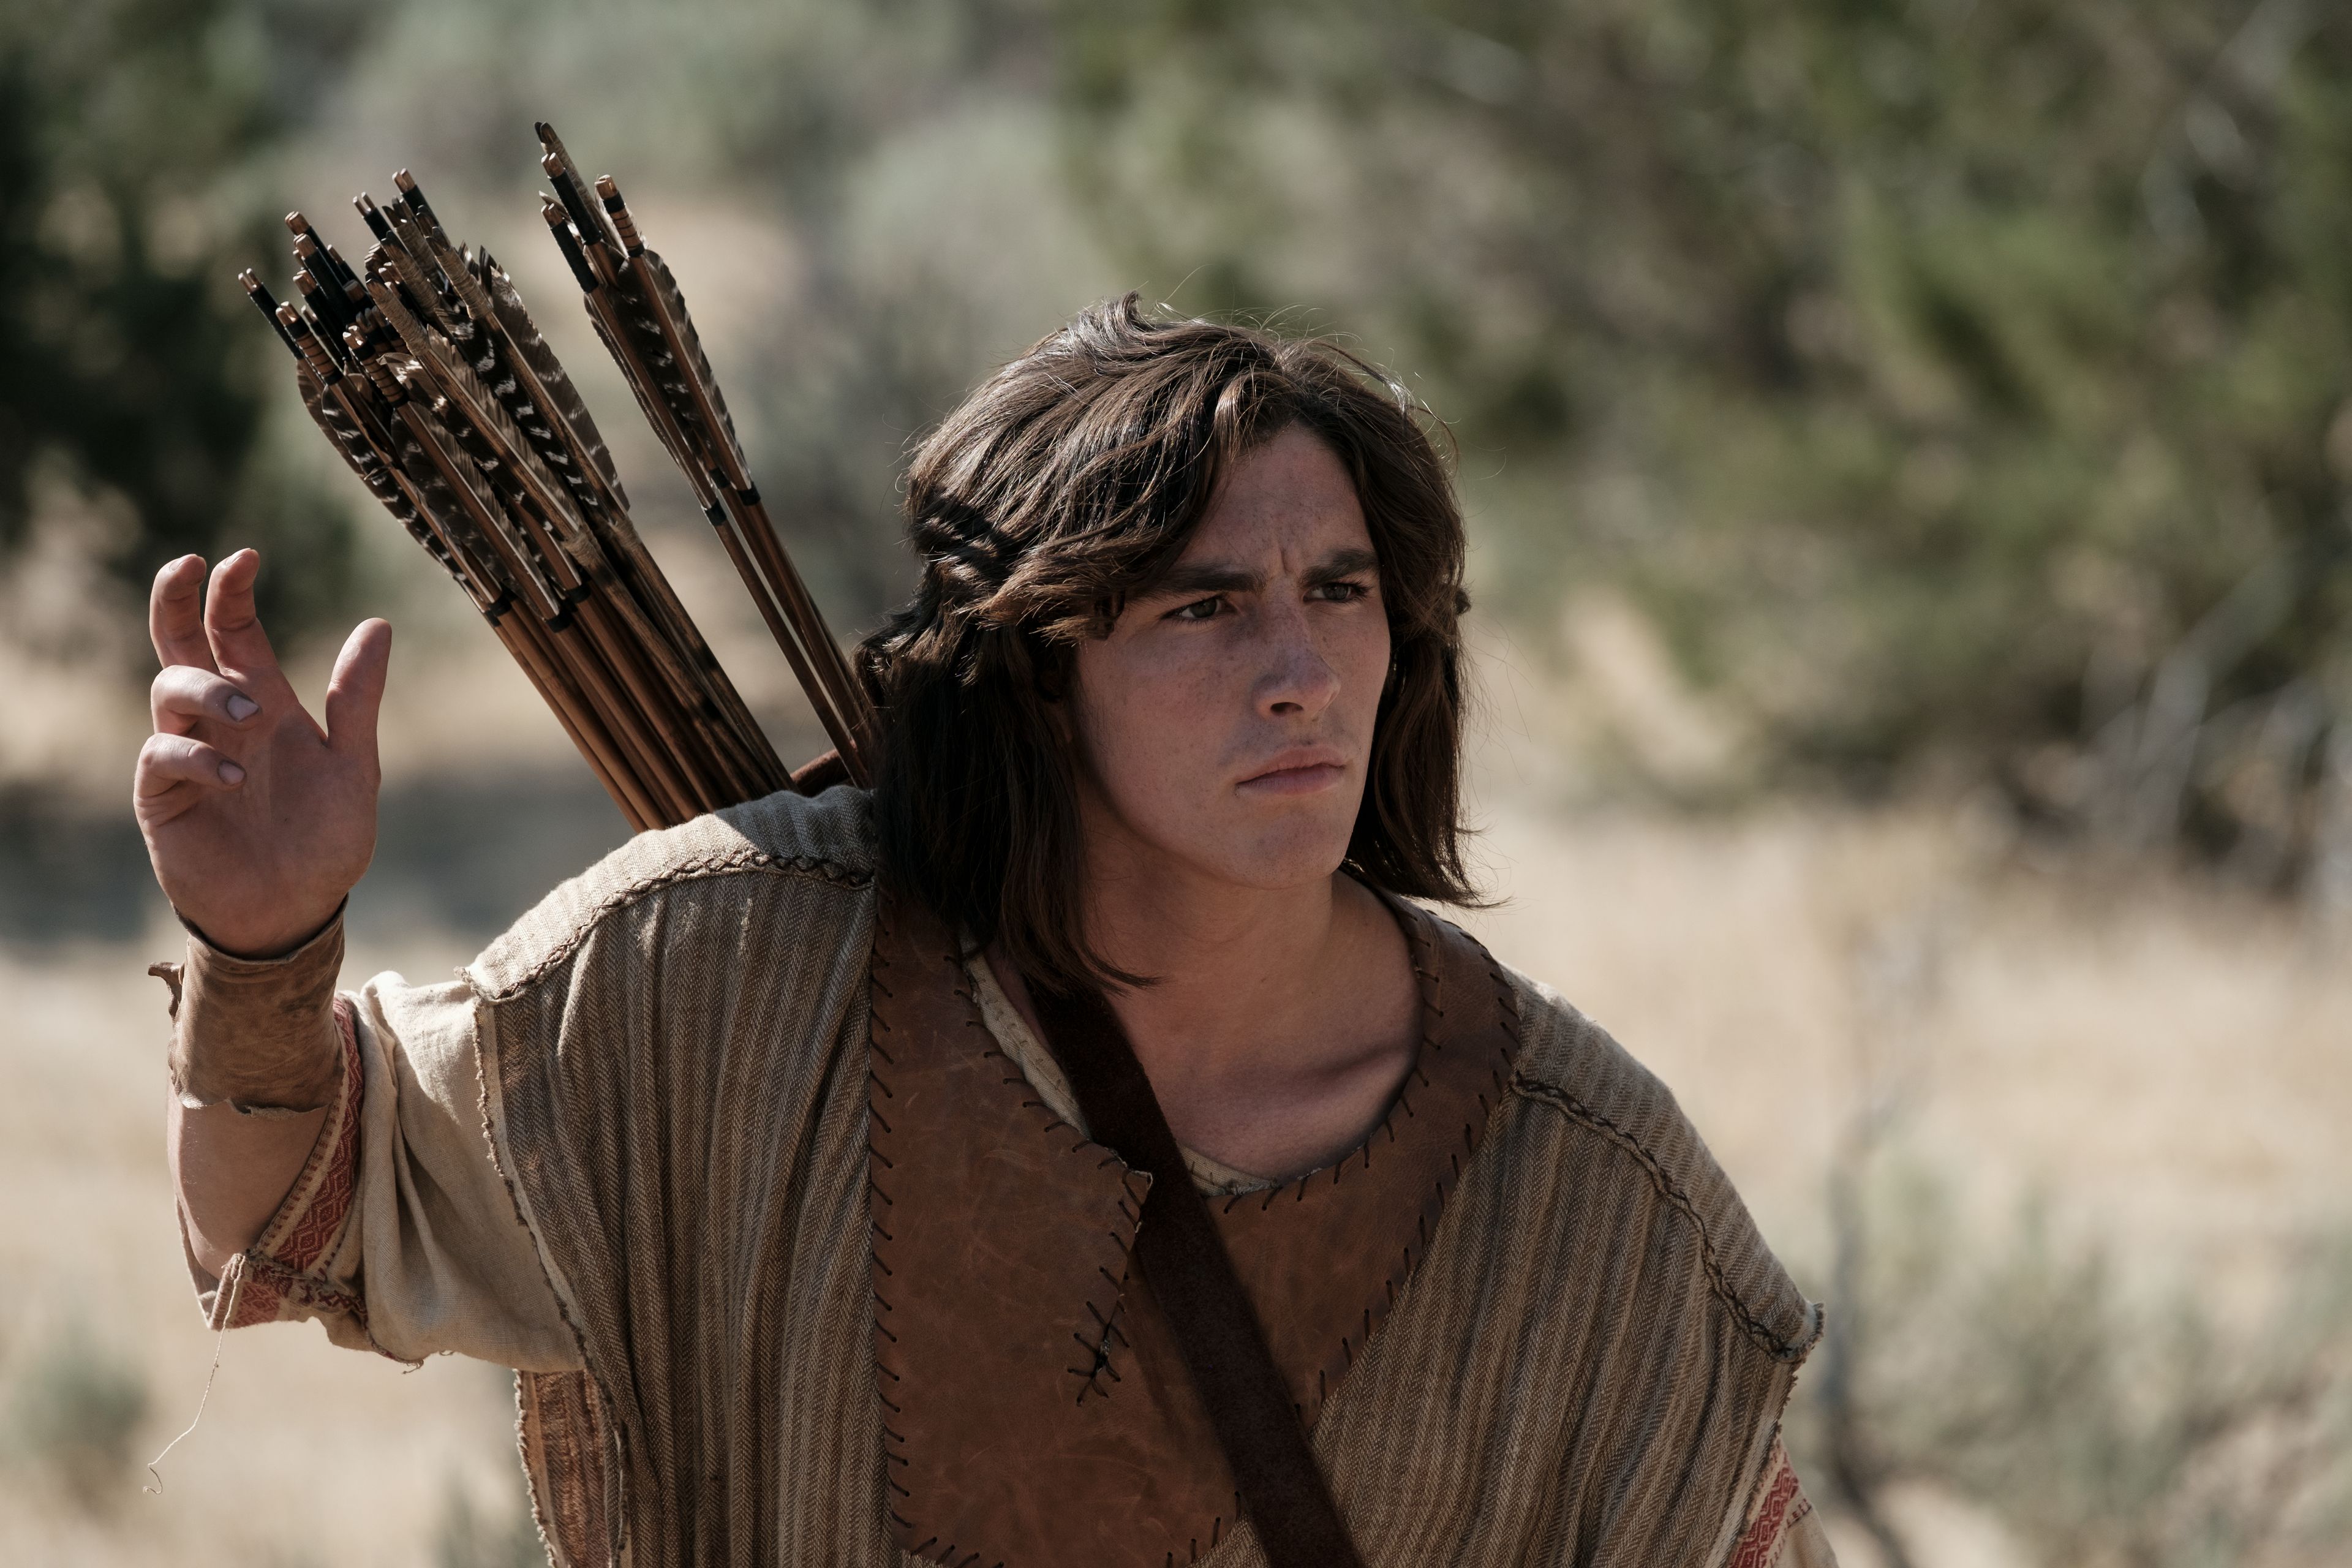 Nephi reaches for an arrow as he hunts in the wilderness.